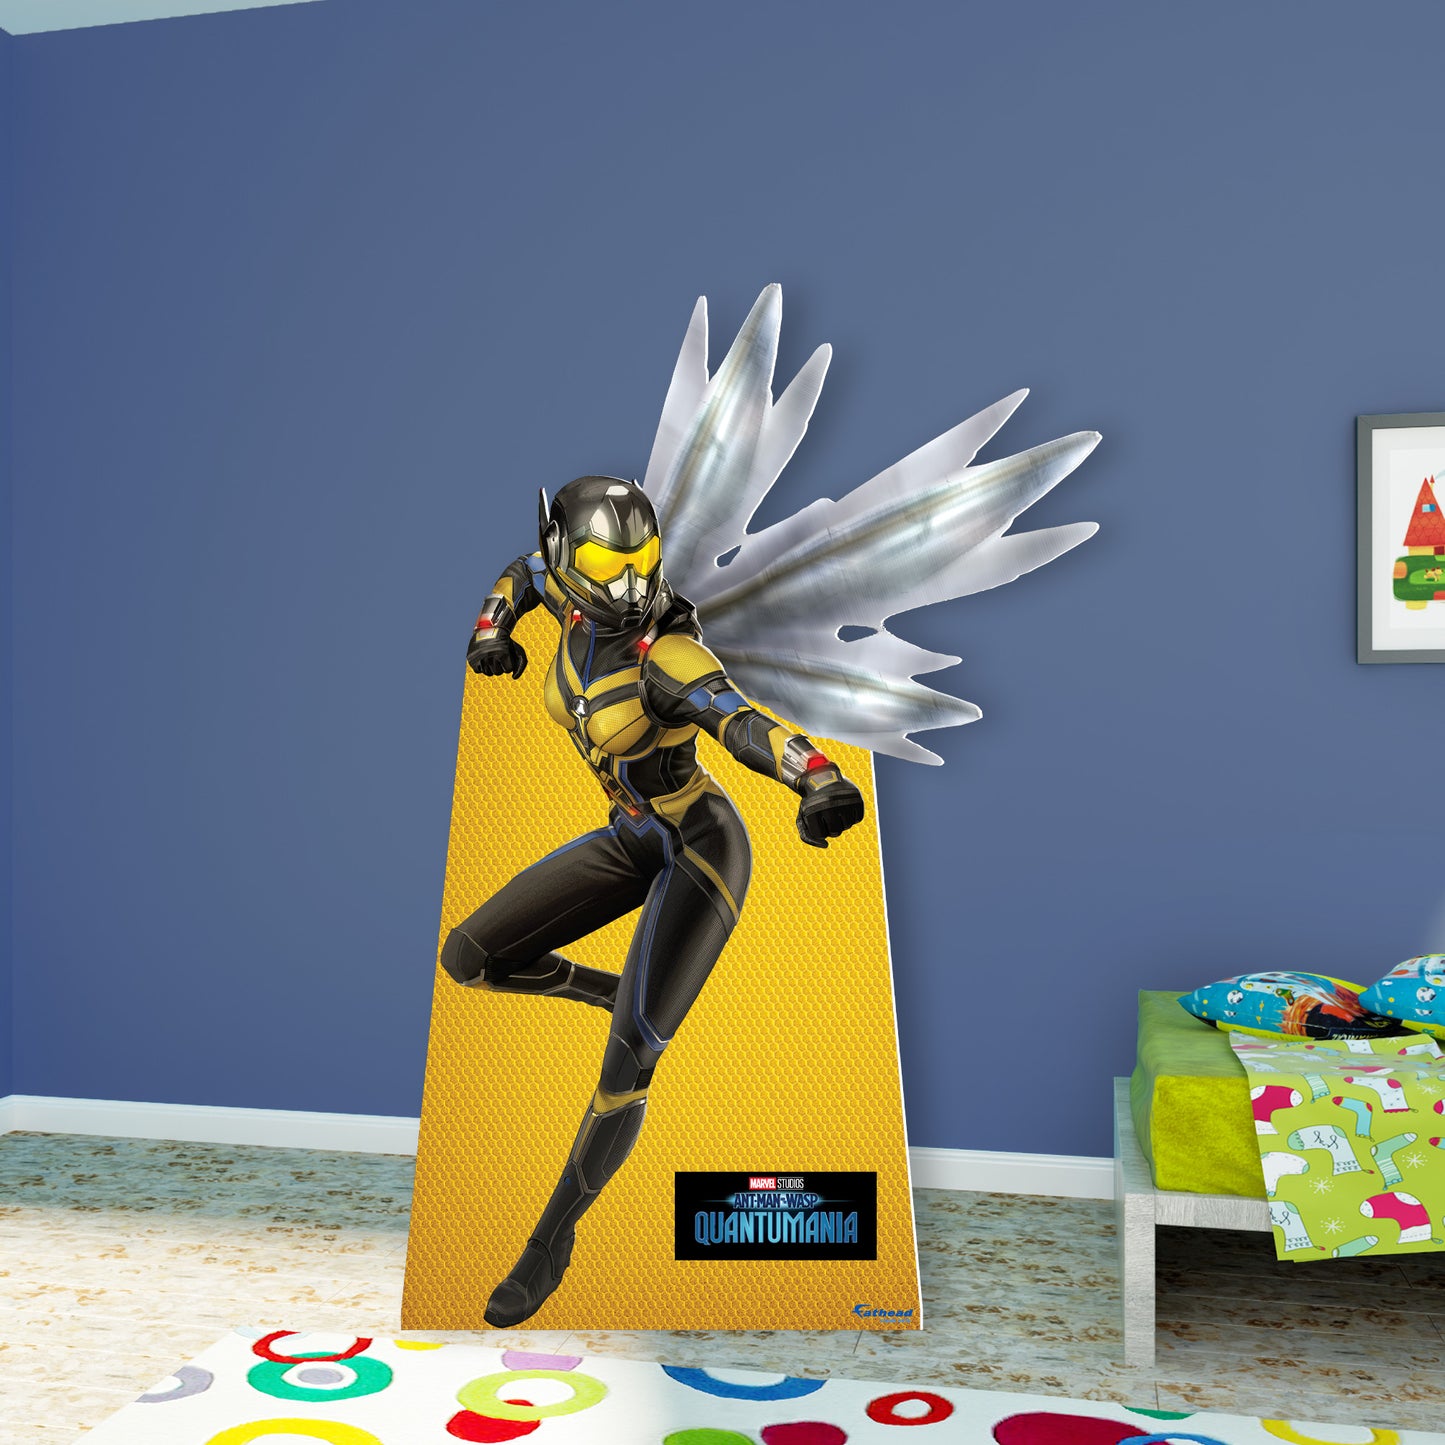 Ant-Man and the Wasp Quantumania: The Wasp Life-Size Foam Core Cutout - Officially Licensed Marvel Stand Out